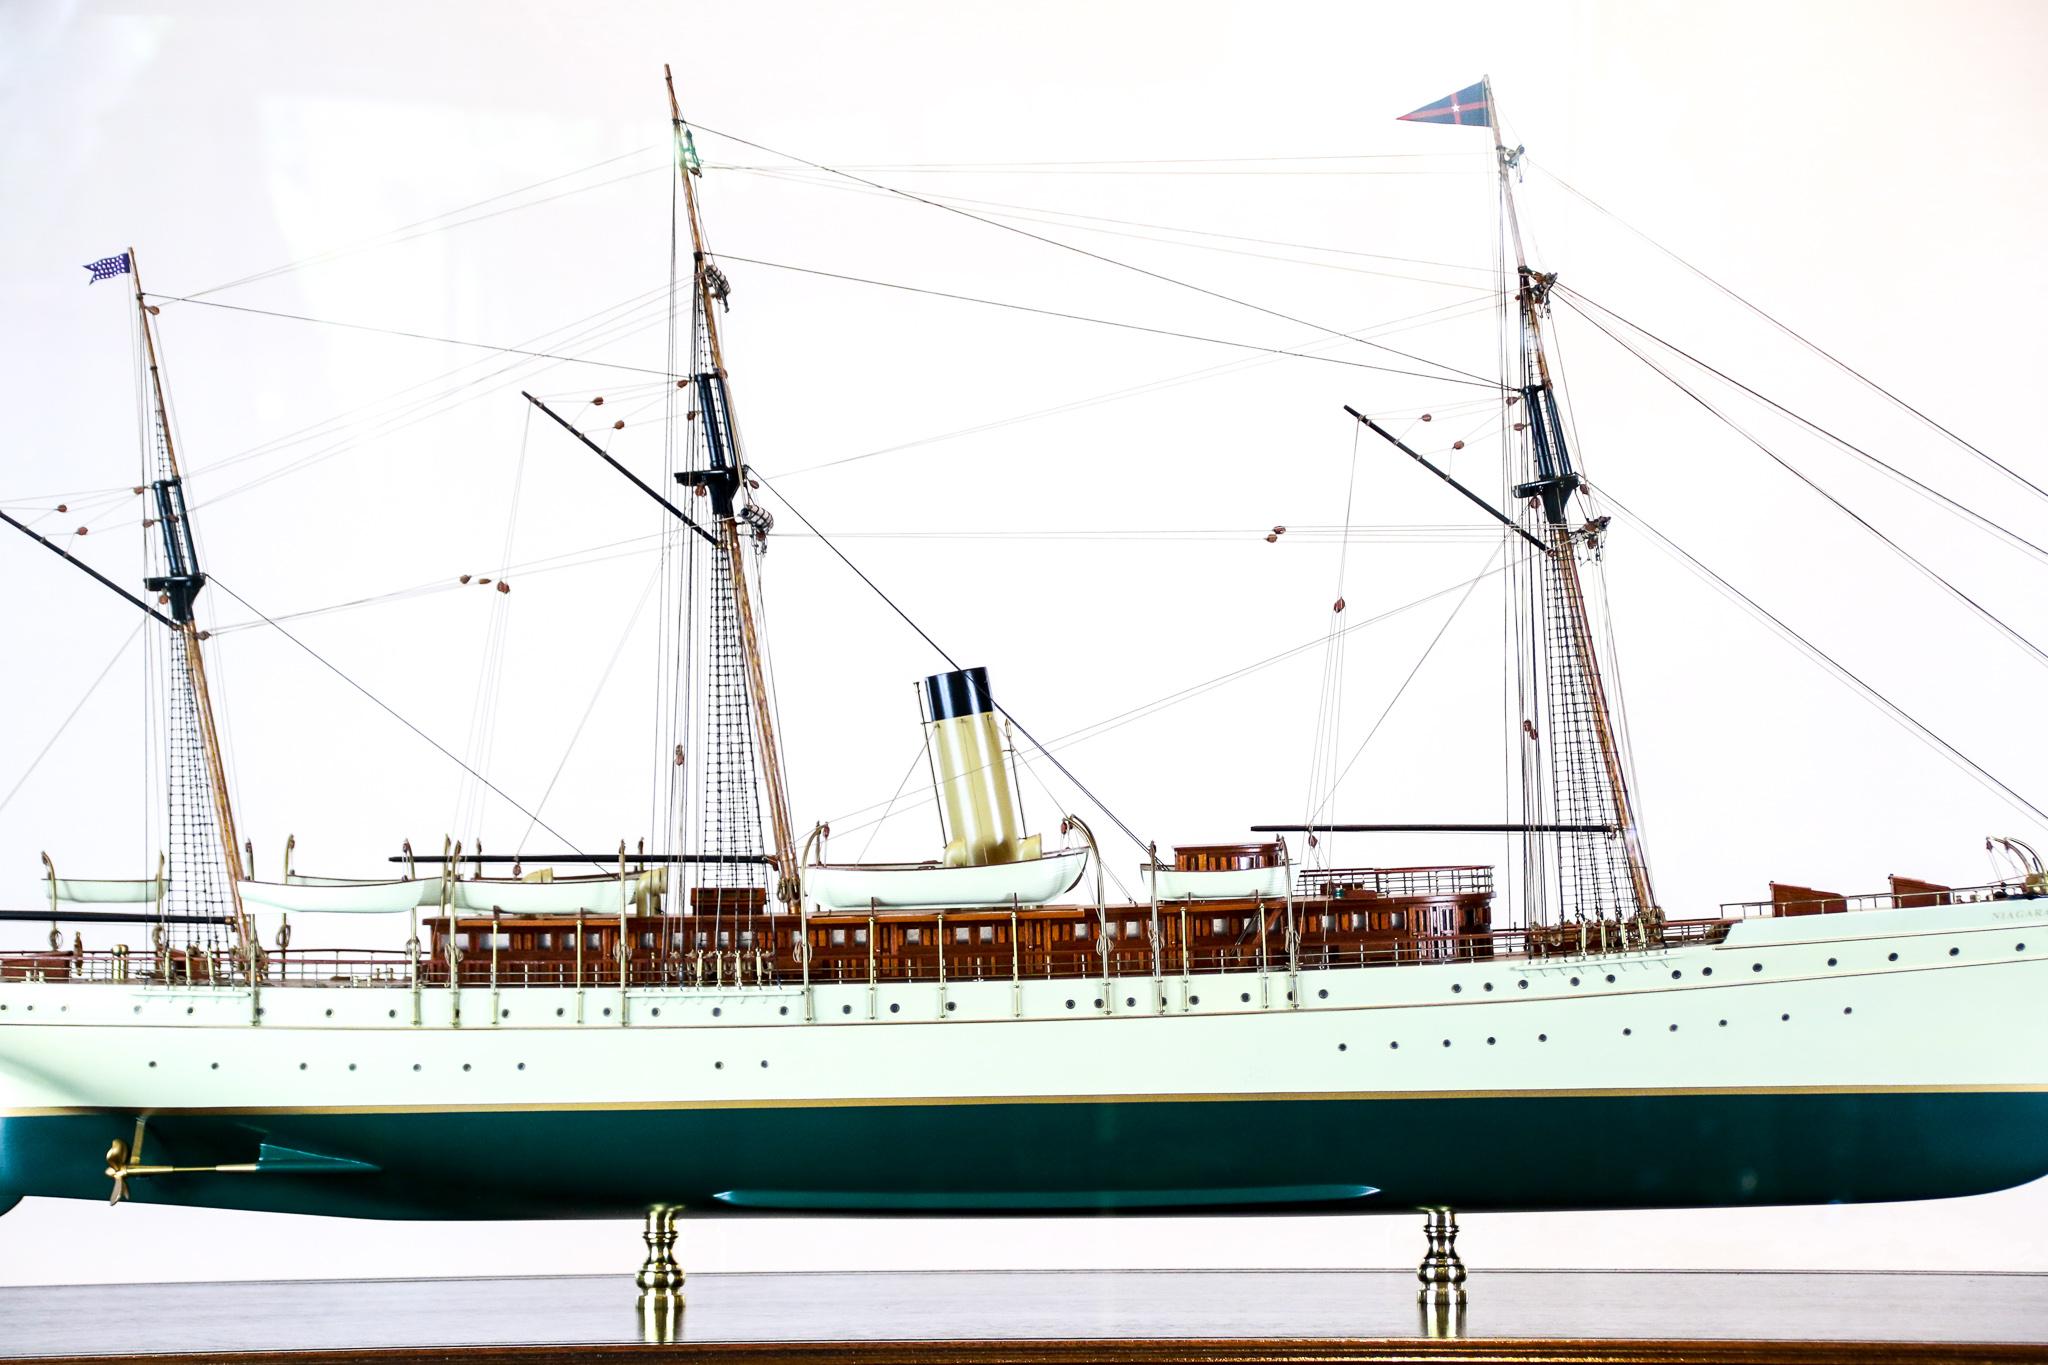 The New York Yacht Club steam yacht Niagara was launched in 1898. She was owned by millionaire Howard Gould (1871-1959), son of railroad tycoon and developer Jay Gould. The Niagara was one of the largest steam yachts ever built at 272 LOA. The model